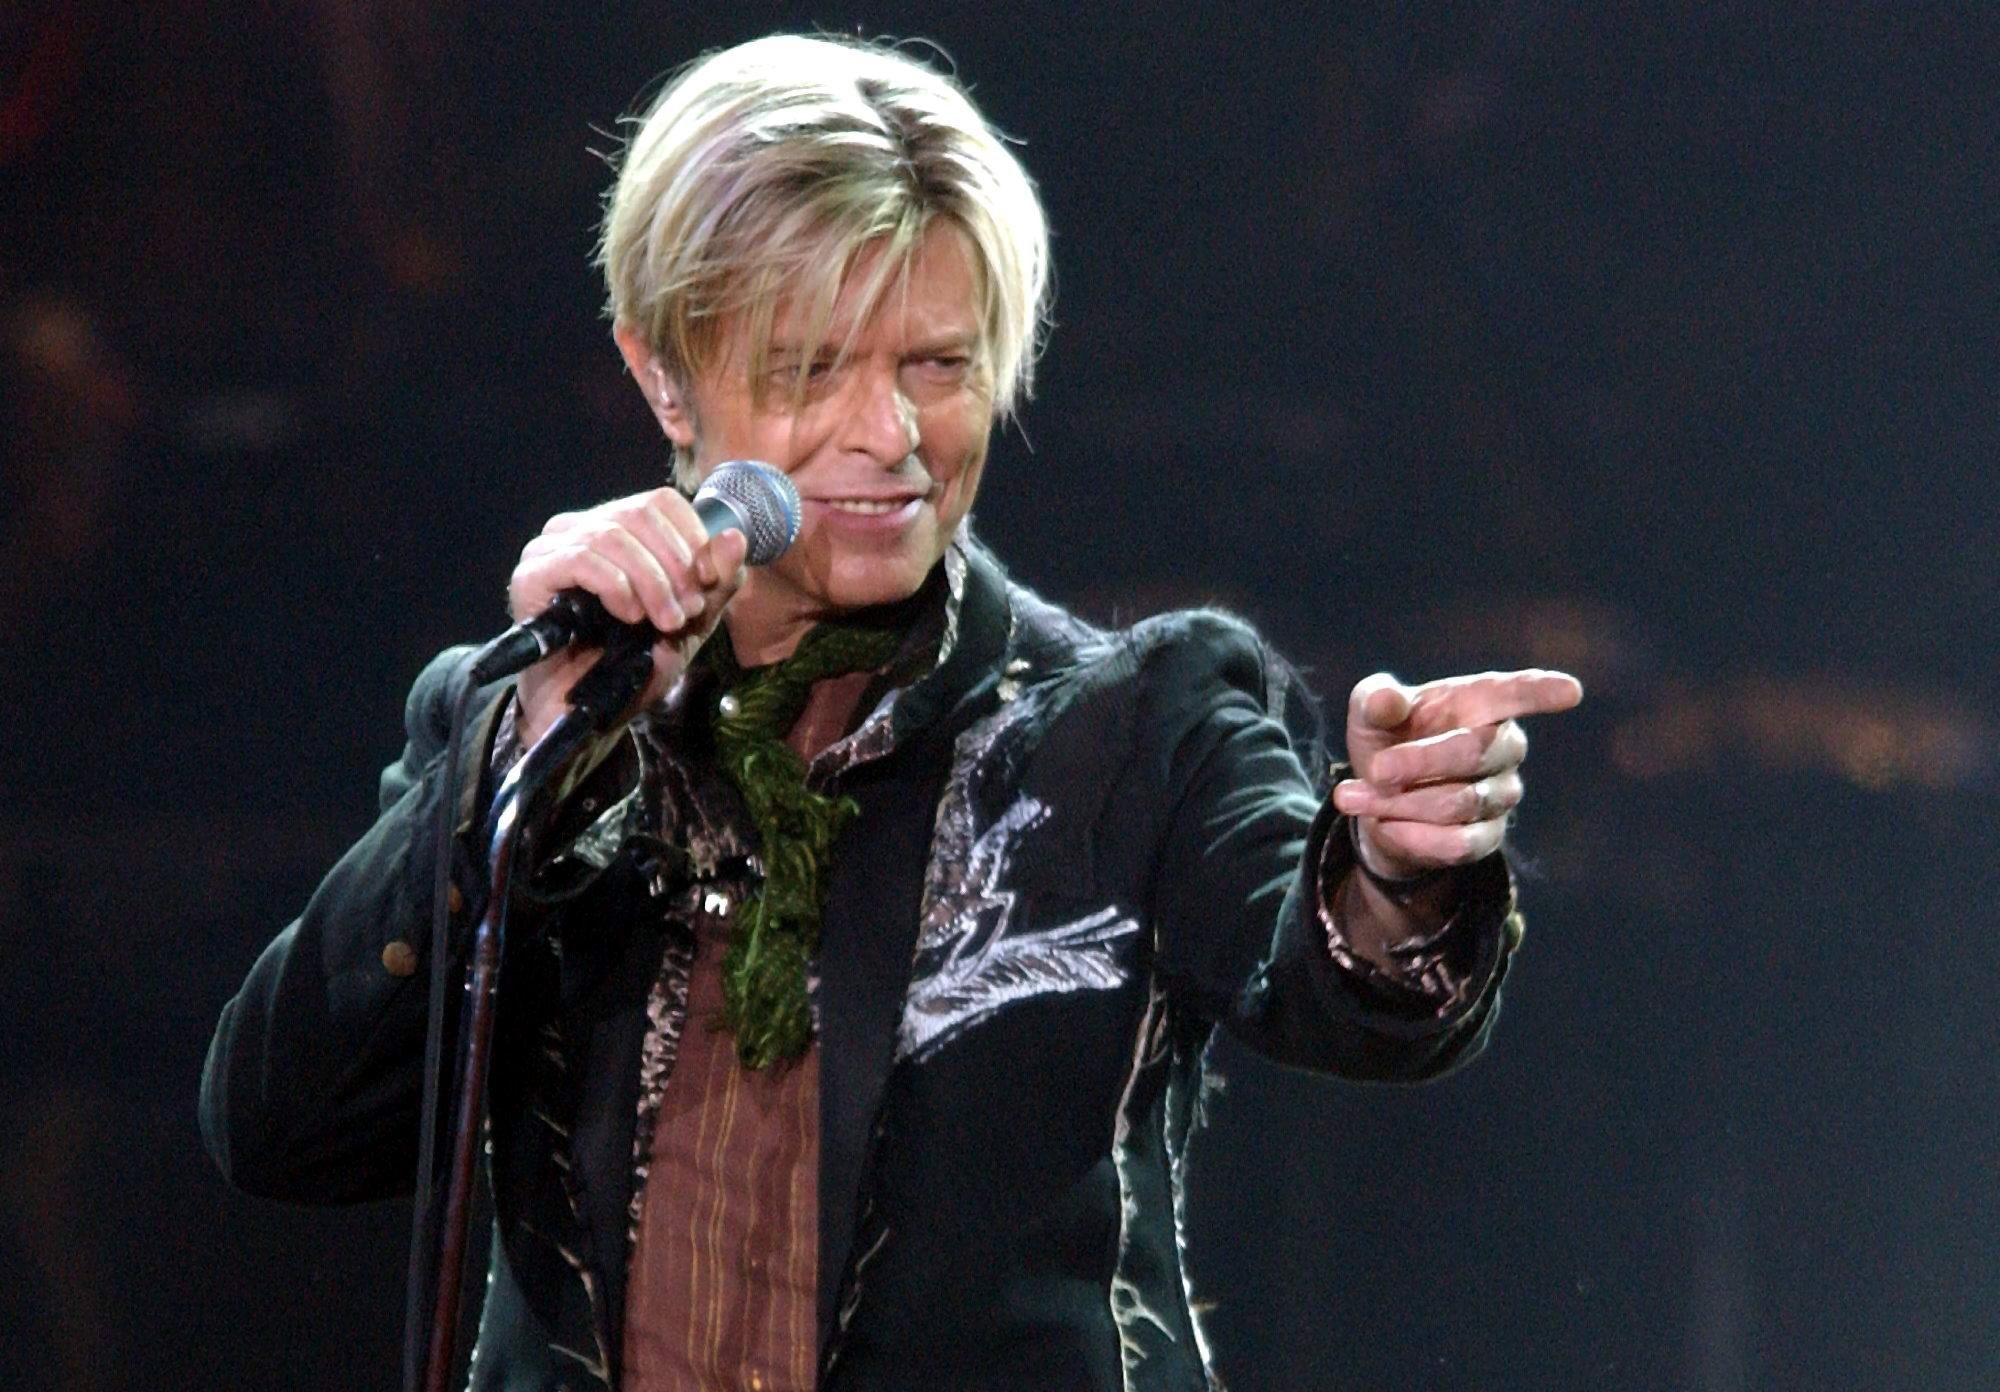 2003-10-16 00:00:00 epa05096696 (FILE) A file photograph showing British rock legend David Bowie perfoming on stage during his concert in Hamburg, Germany, 16 October 2003. According to reports quoting David Bowie's son and his official Facebook page, Bowie, 69, has died on 11 January 2016 after a battle with cancer. 'David Bowie died peacefully on 11 January 2016 surrounded by his family after a courageous 18 month battle with cancer. While many of you will share in this loss, we ask that you respect the family's privacy during their time of grief,' read a statement posted on the artist's official social media accounts. EPA/MAURIZIO GAMBARINI